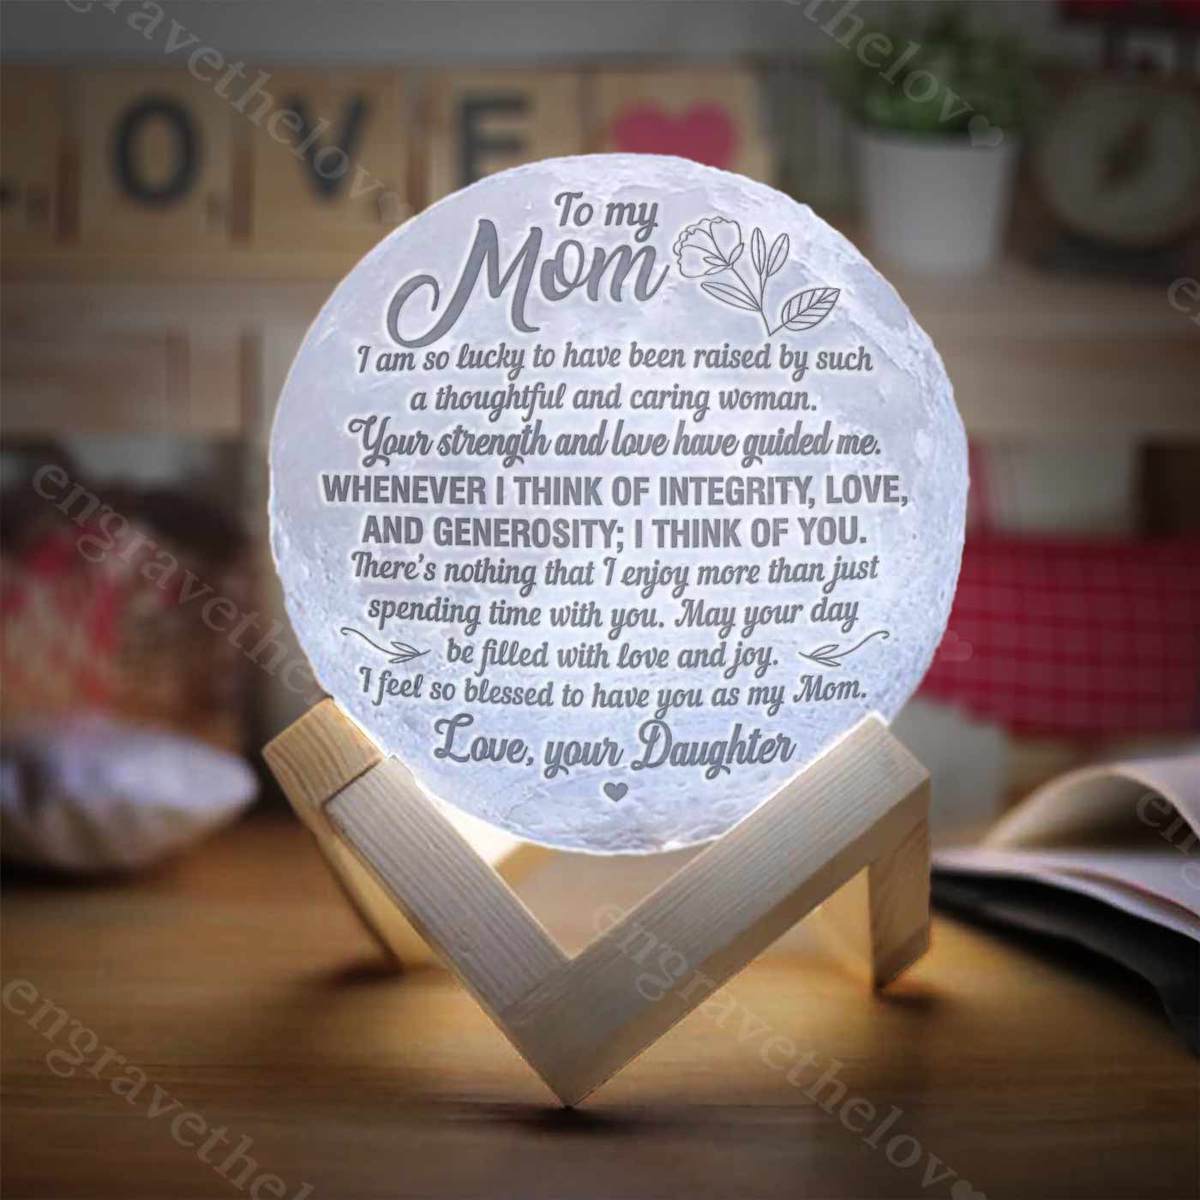 A Thoughtful Woman Moon Lamp Engrave The Love